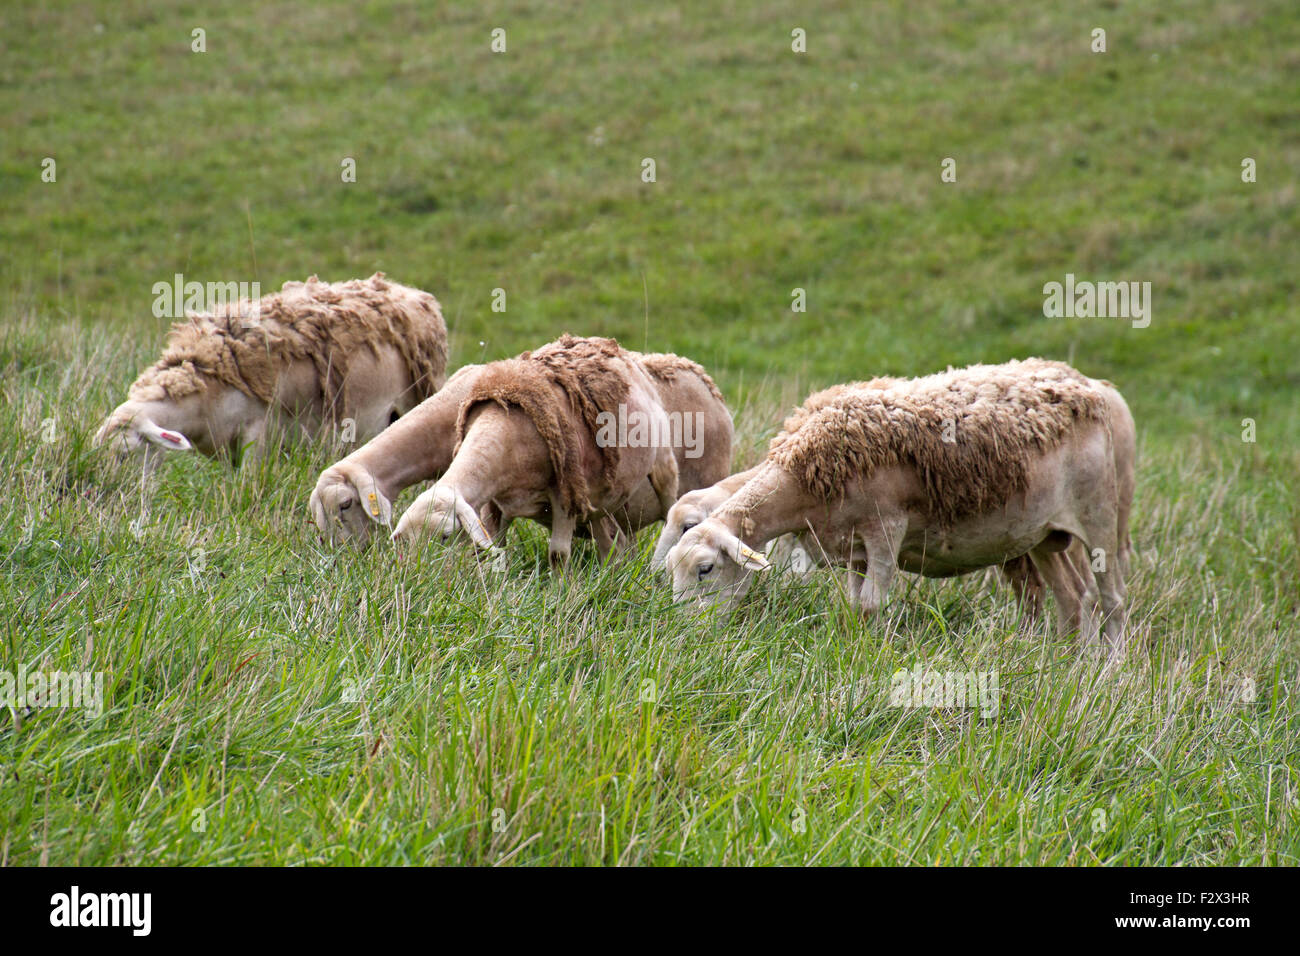 Shaggy sheep graze peacefully together in a mountain meadow of wild grass with a forest in the background in late summer Stock Photo